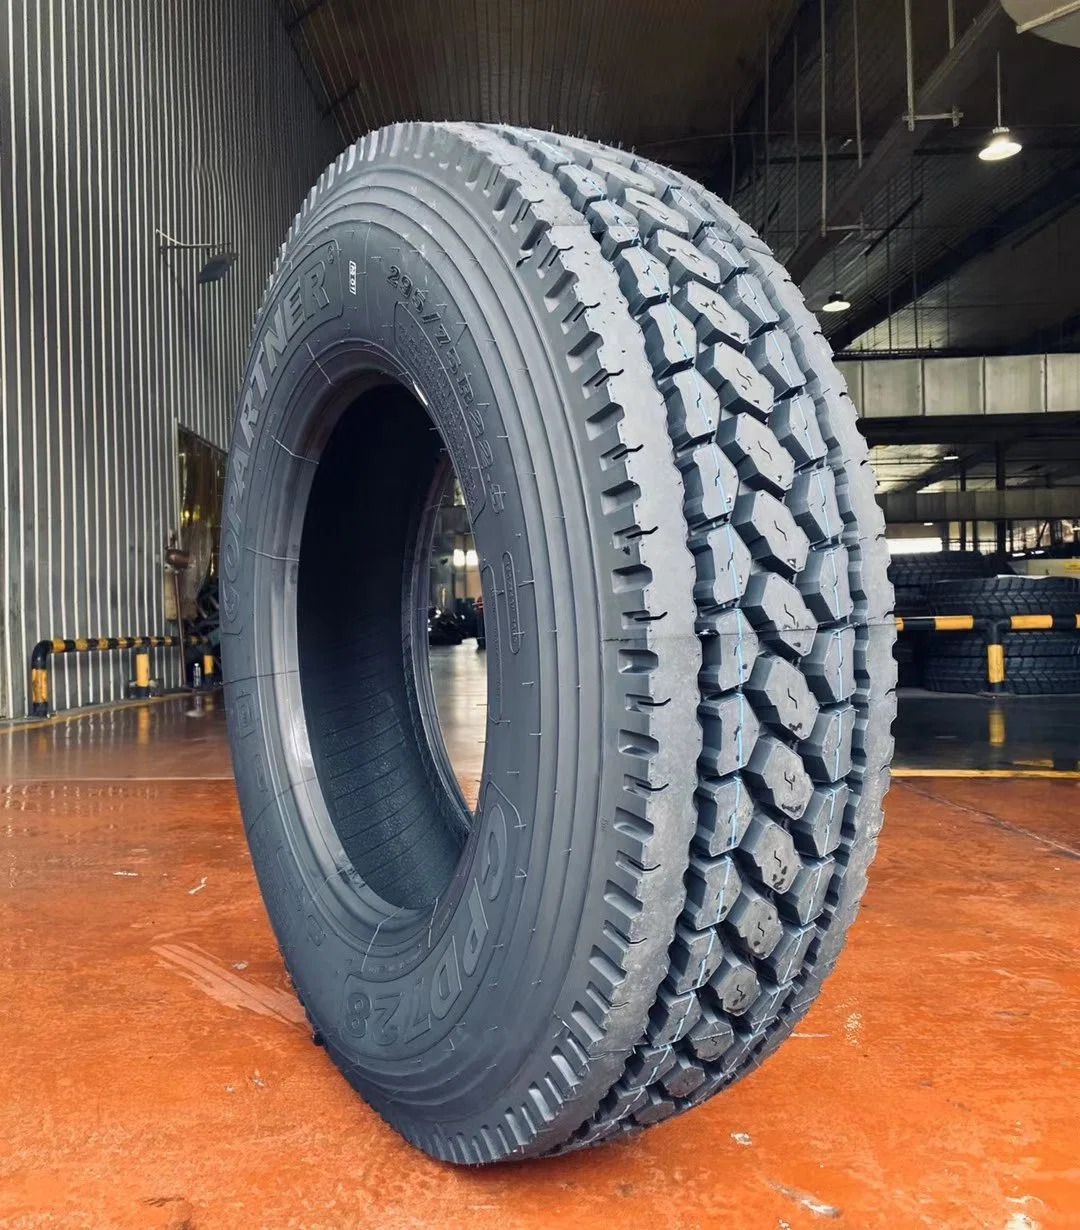 a Starlux D271 drive tire sitting on a red floor in a warehouse.